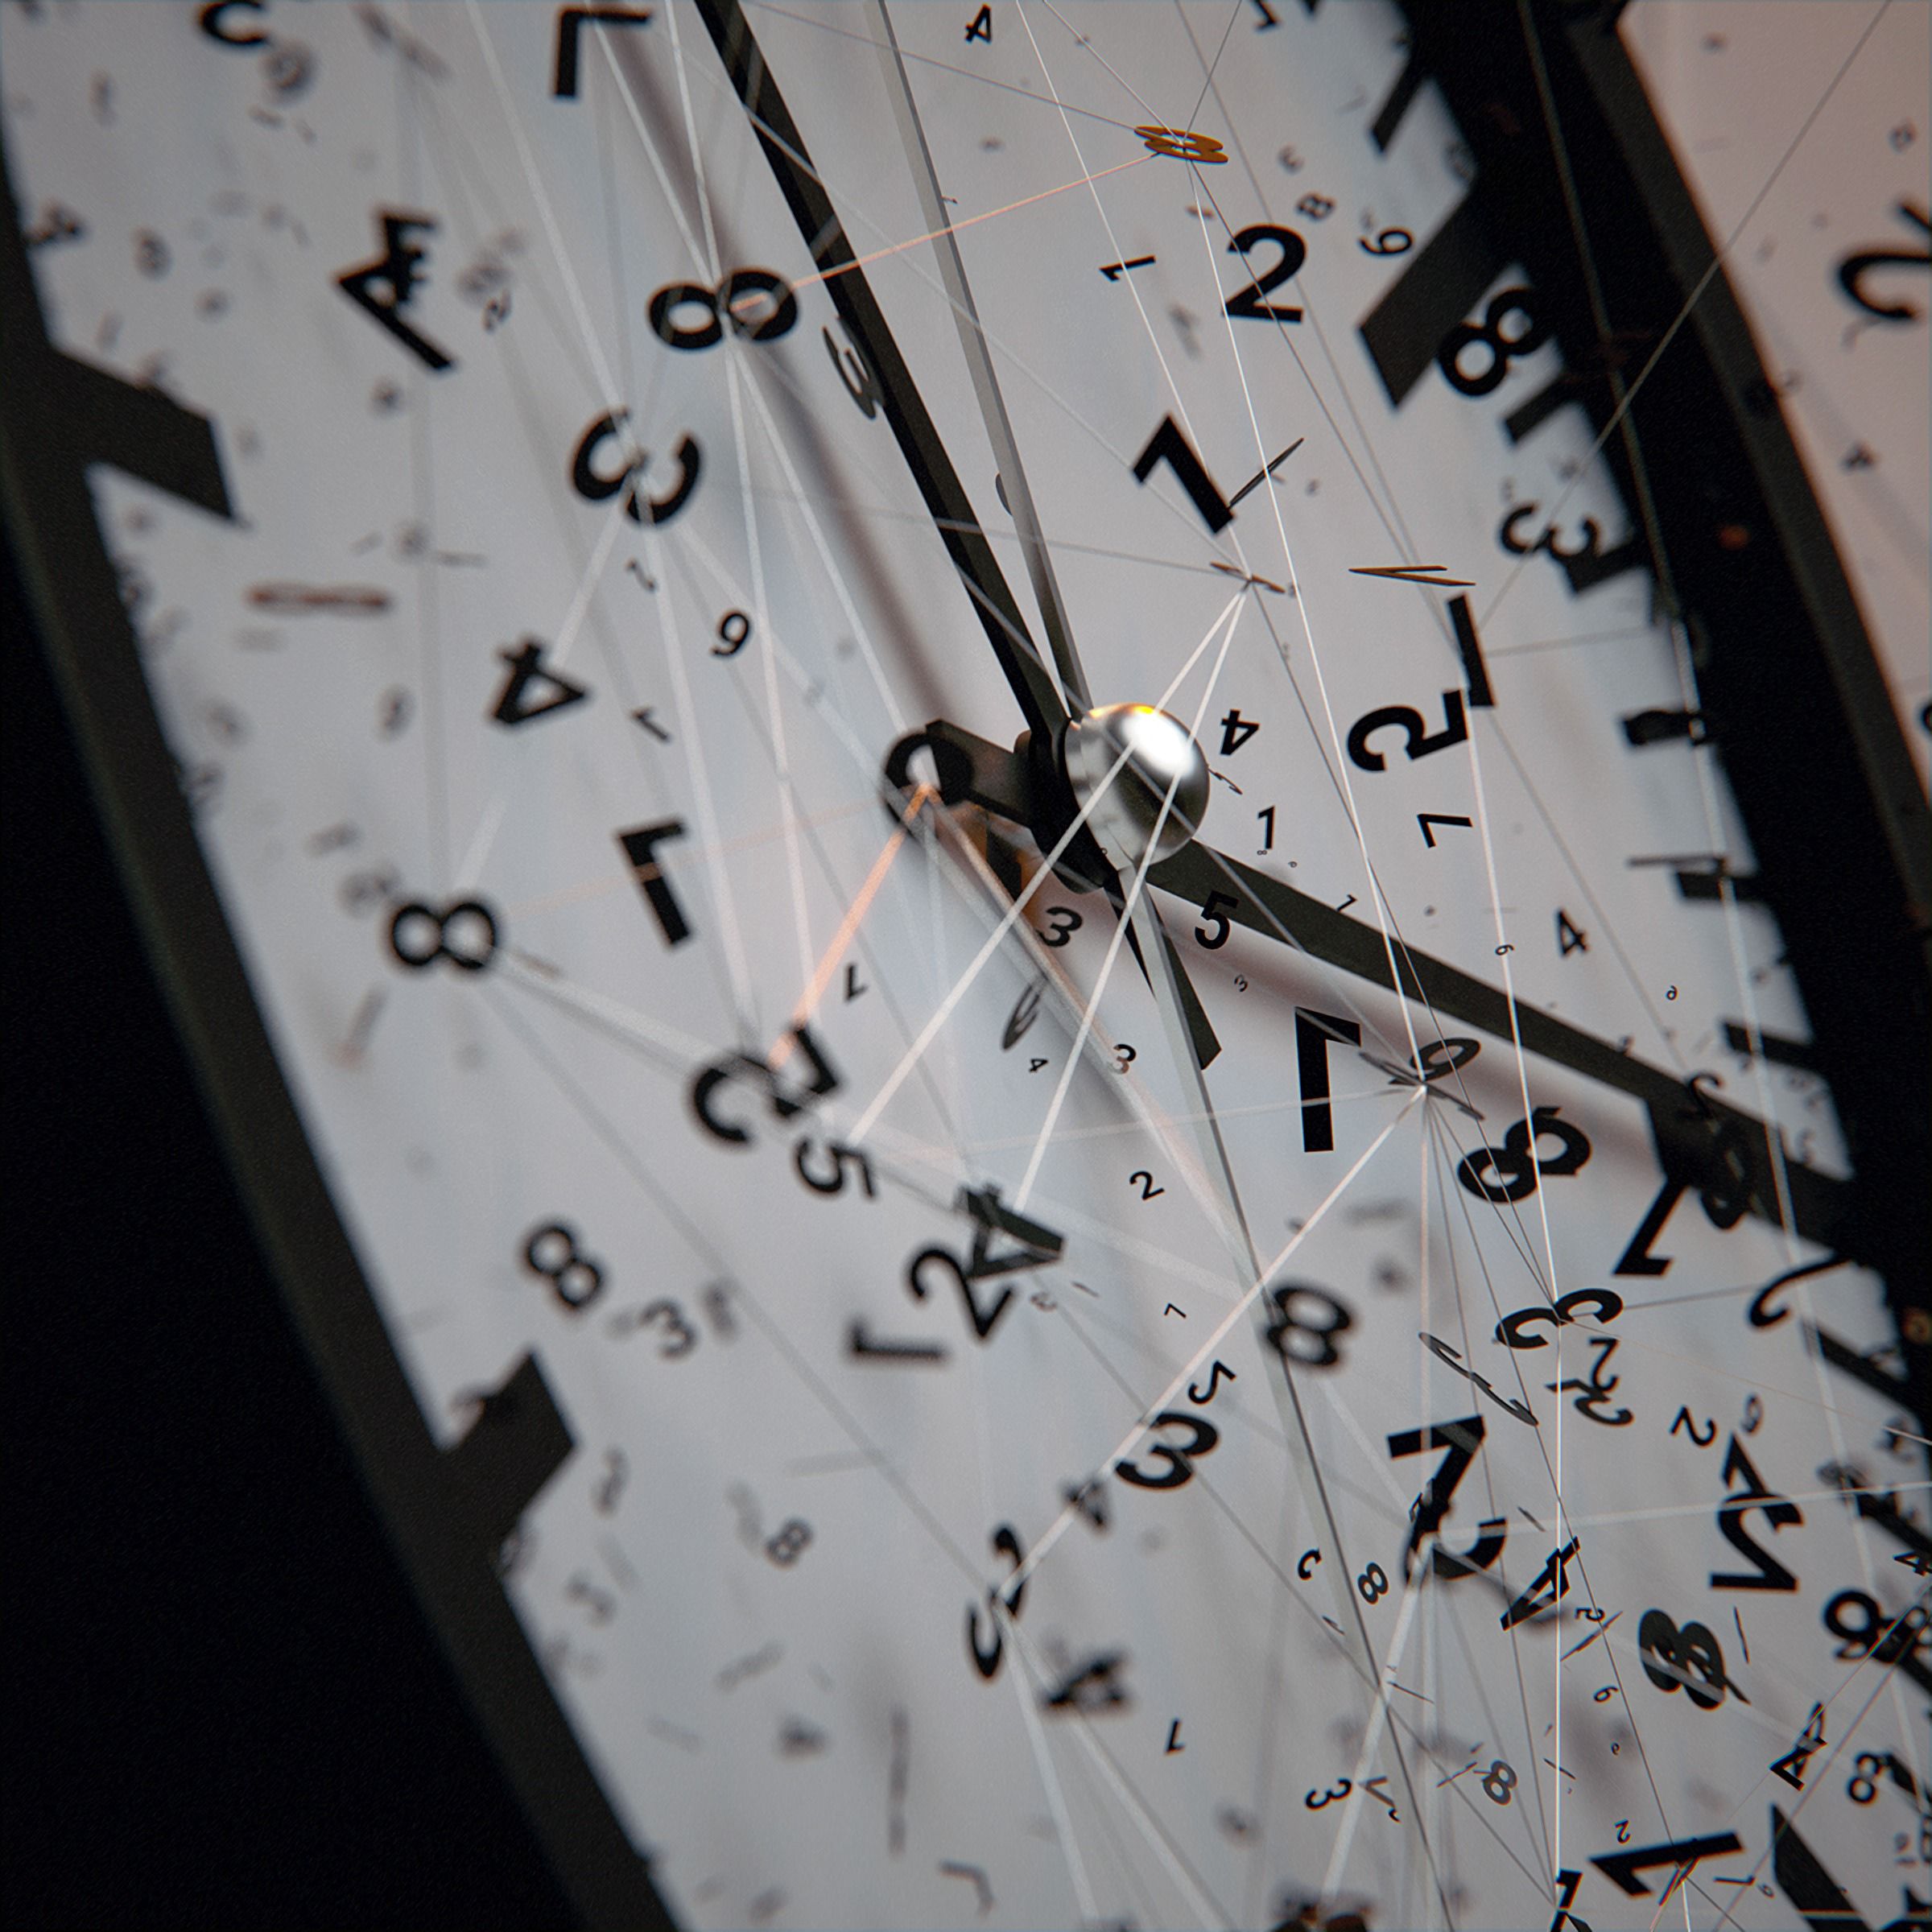 wallpapers miscellanea, numbers, clock face, clock, dial, intricate, miscellaneous, lines, confused, arrows